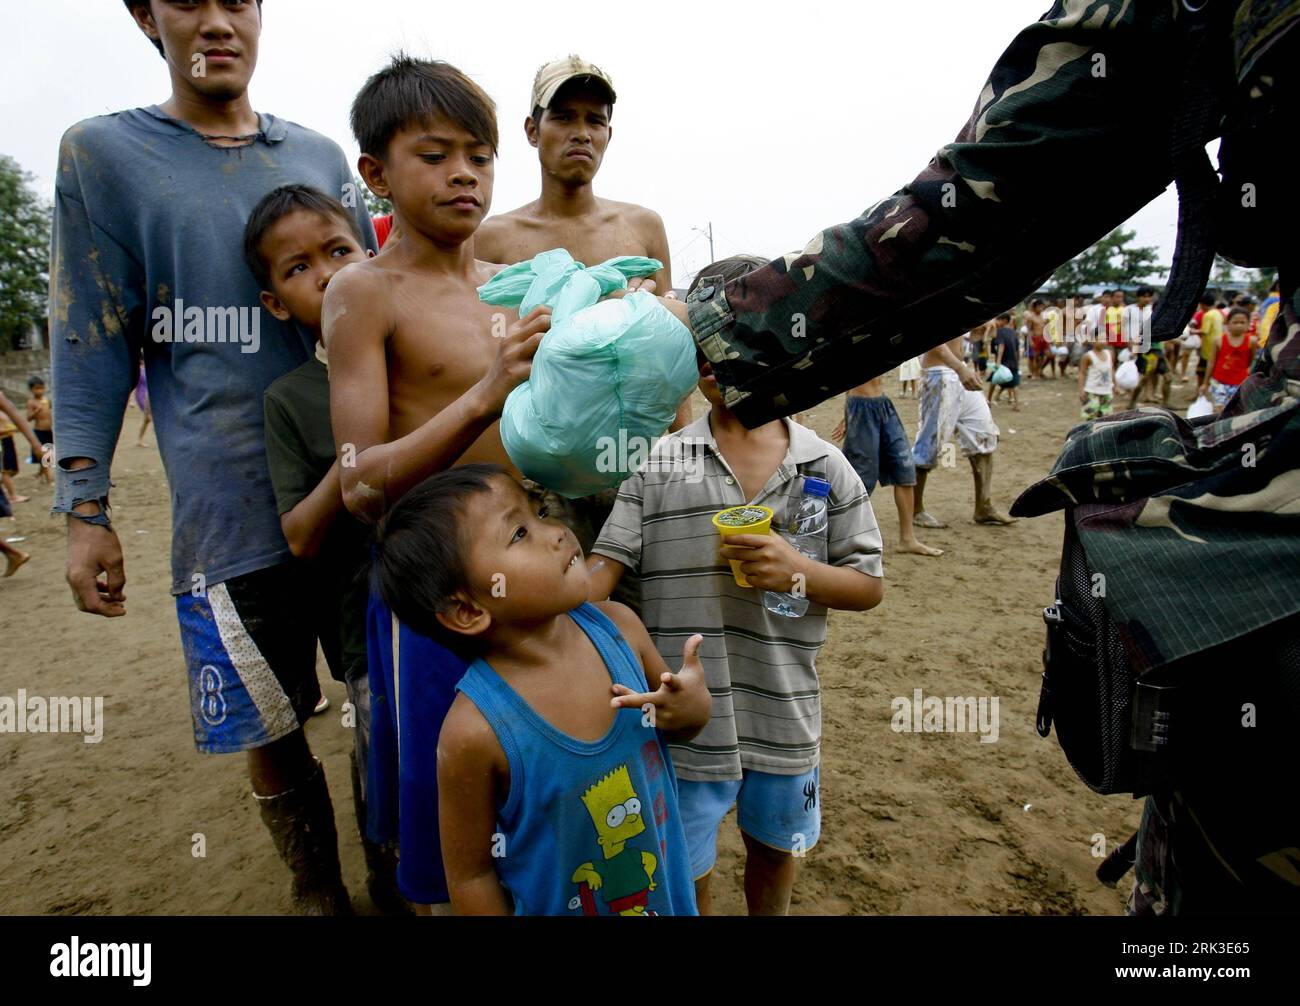 Bildnummer: 53467911  Datum: 30.09.2009  Copyright: imago/Xinhua (090930) -- RIZAL PROVINCE (PHILIPPINES), Sept. 30, 2009 (Xinhua) -- Flood victims line up to get food and clothes at a village in Rodriguez, Rizal province, the Philippines, Sept. 30, 2009. Kestana, locally known as Ondoy, swept through the central Luzon region last Saturday. The epic rainfall brought by the storm caused massive flooding and landslides. Two hundred and forty-sixwere killed, 42 remain missing while nearly 700,000fled their flooded homes to stay in either evacuation centers or with host families. (Xinhua/Luis Liwa Stock Photo